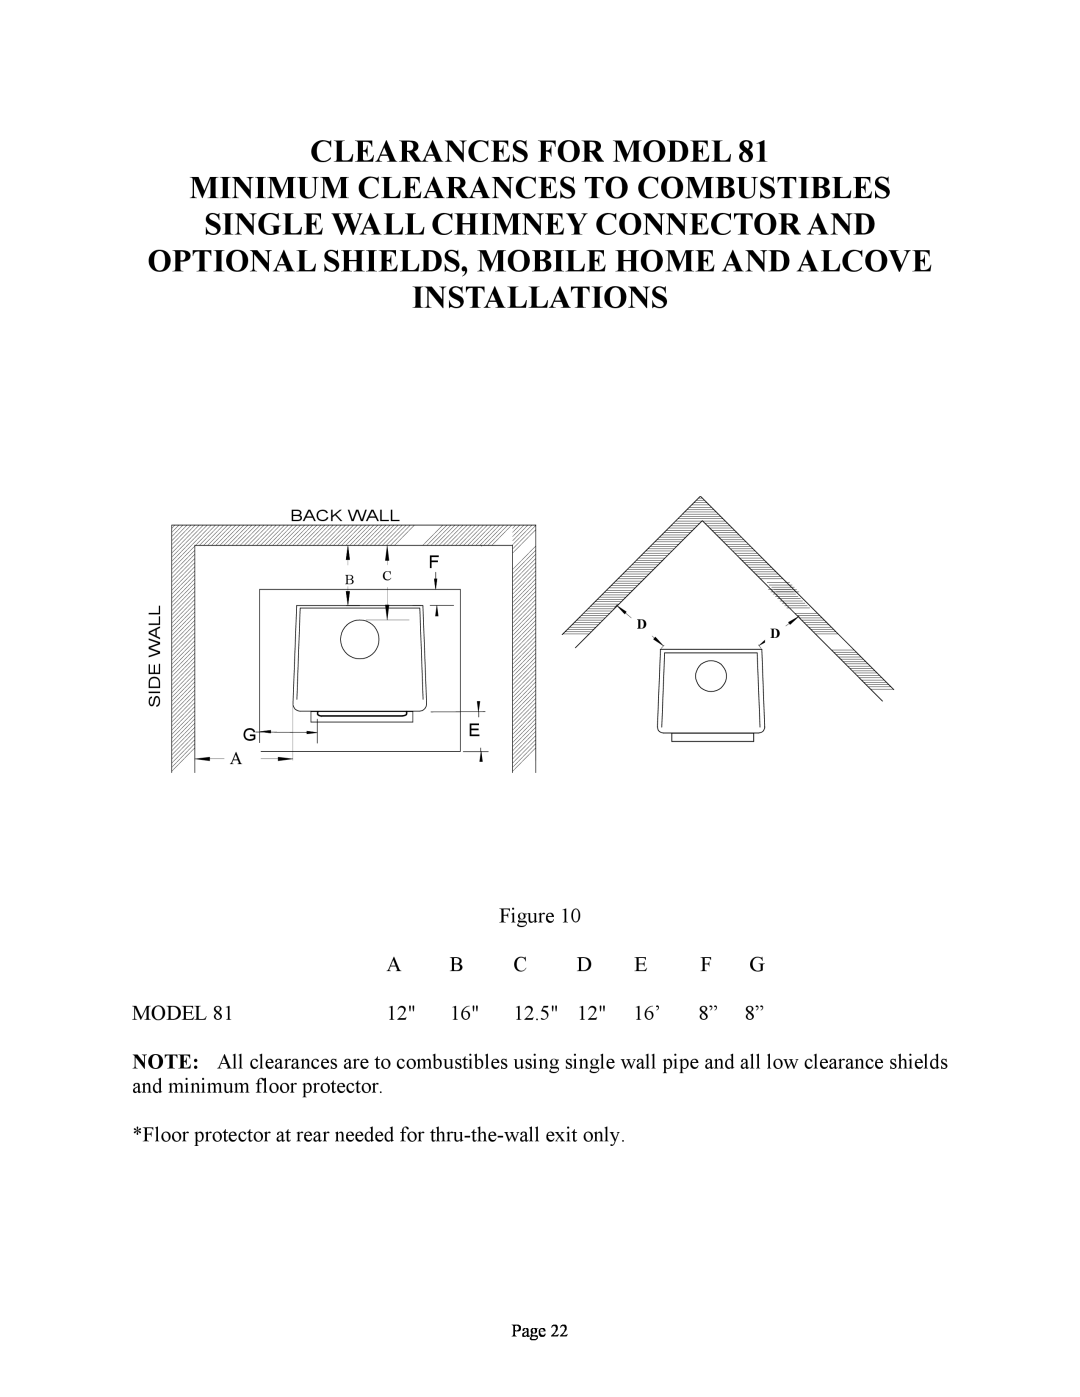 New Buck Corporation 81 installation instructions Clearances For Model 